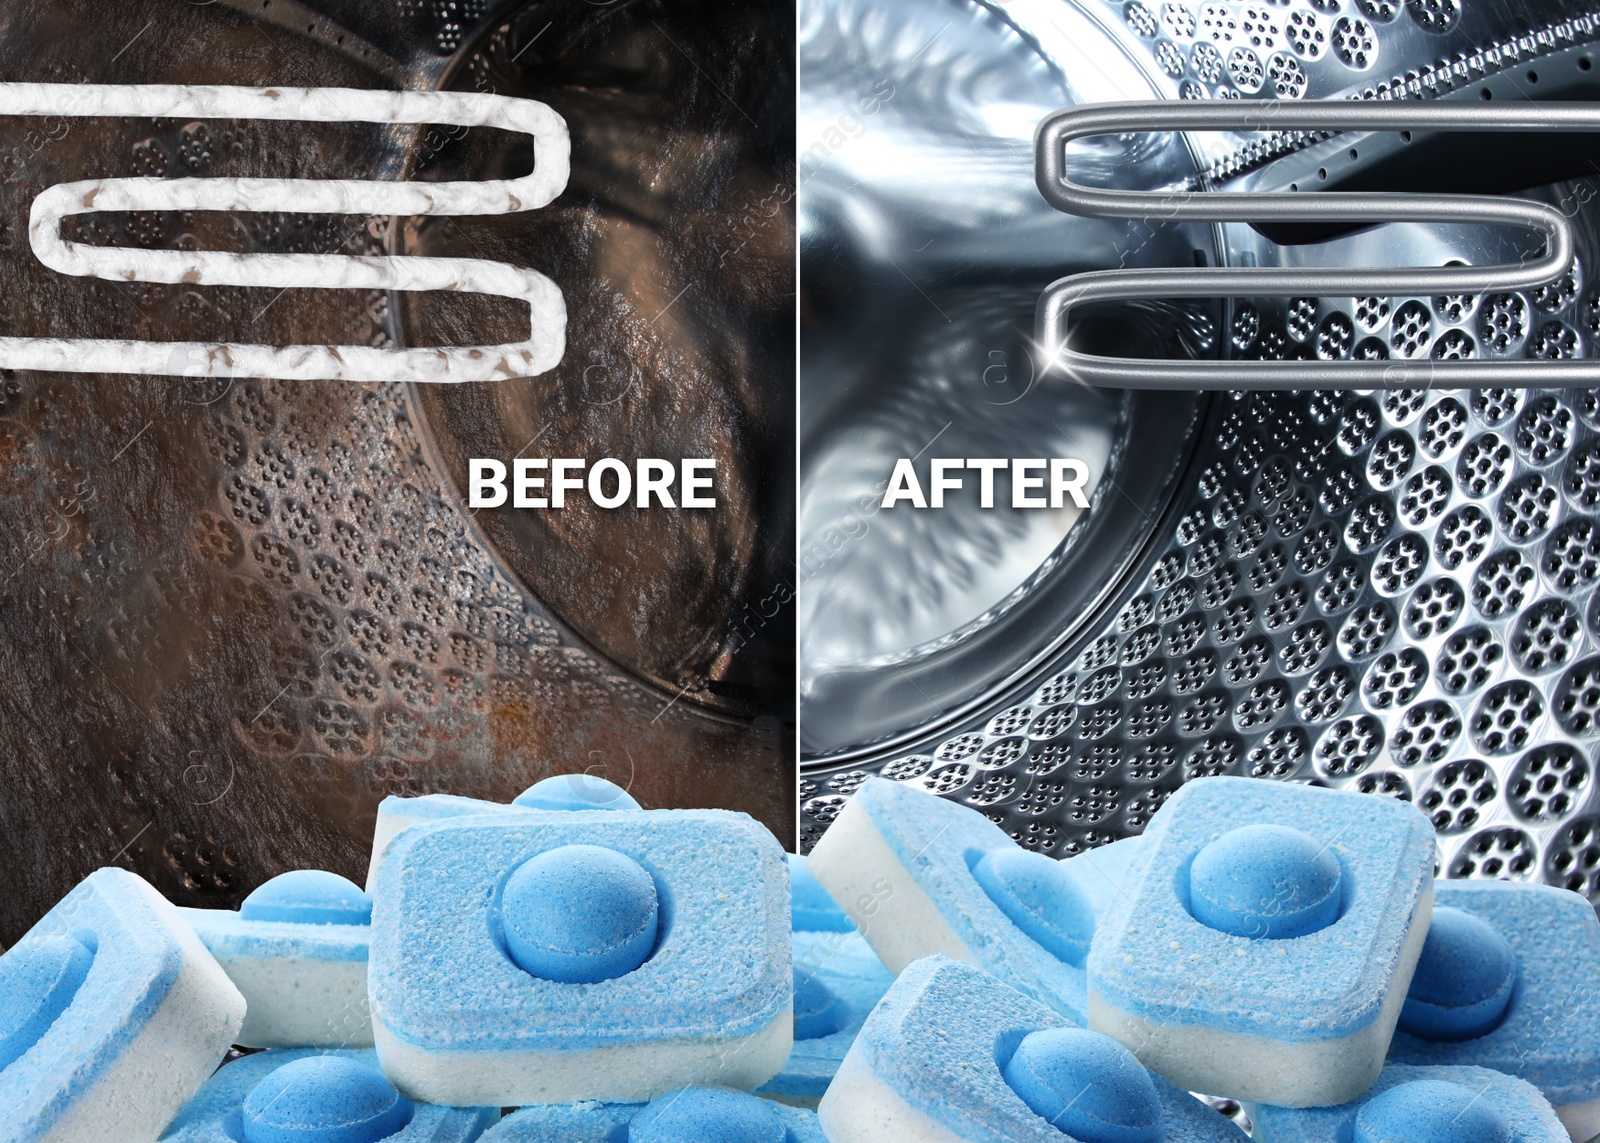 Image of Drum and heating element of washing machine before and after using water softener tablets, collage